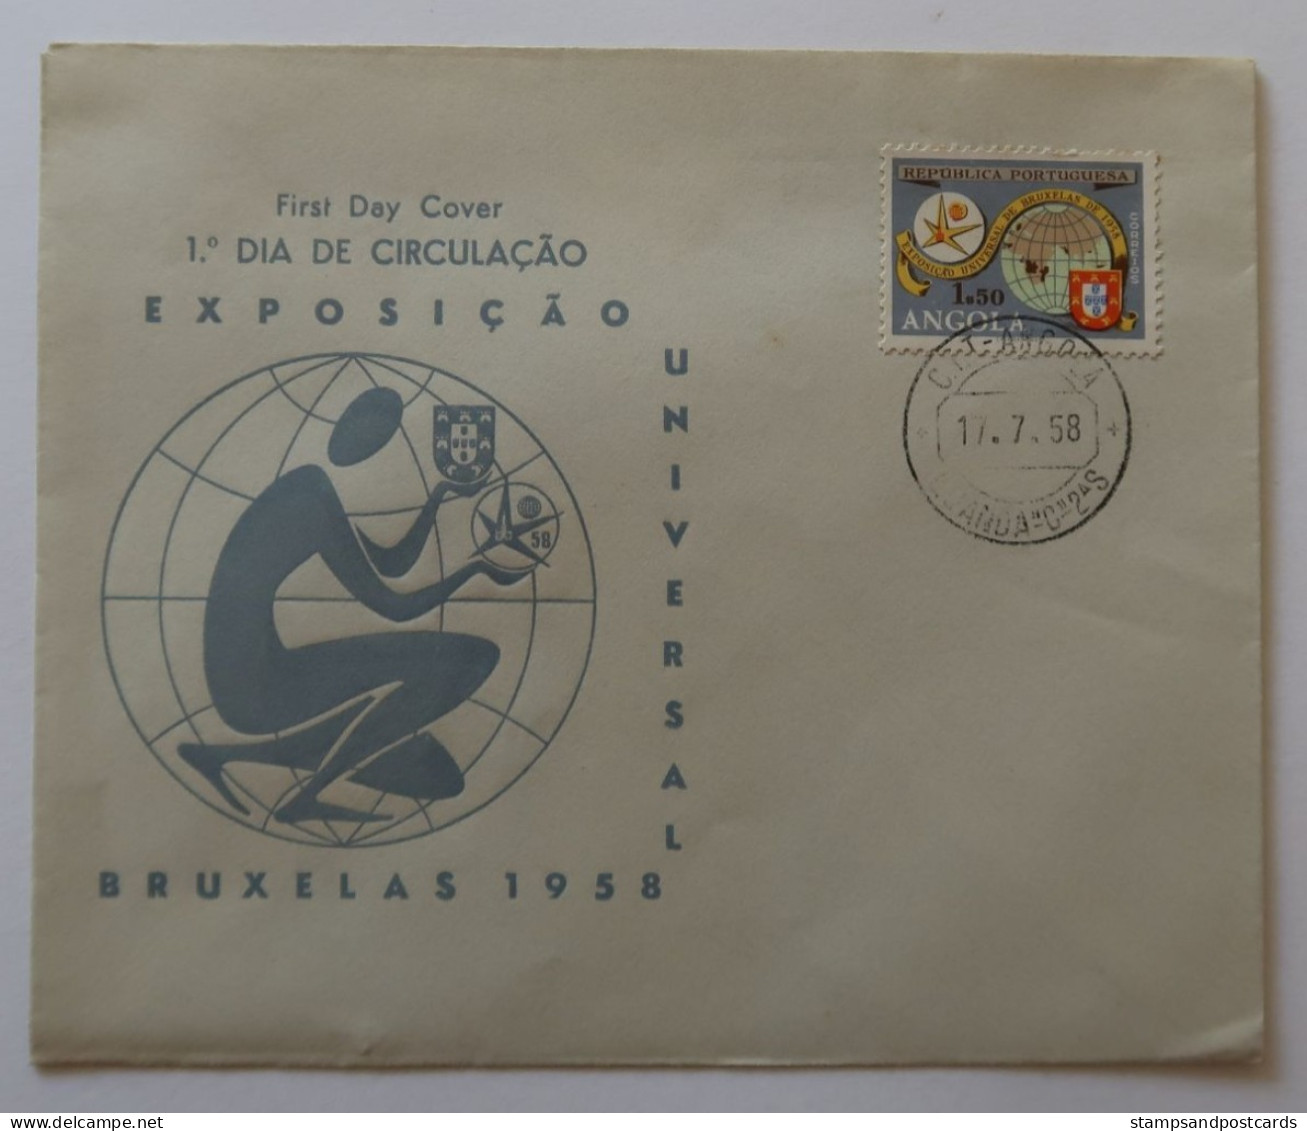 Angola Expo 1958 Bruxelles Brussels FDC - 1958 – Bruselas (Bélgica)